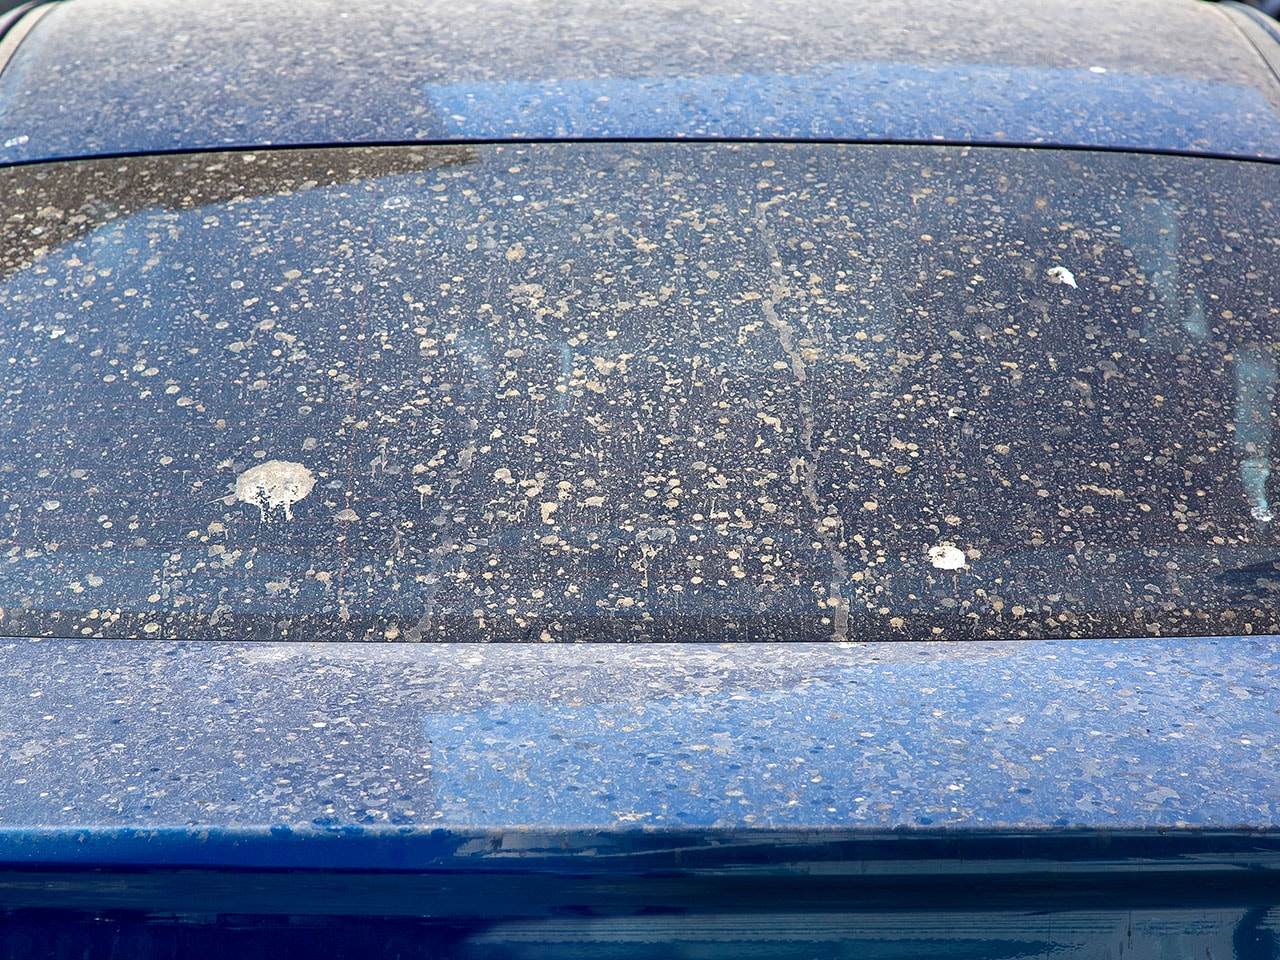 Water spots and dust on car